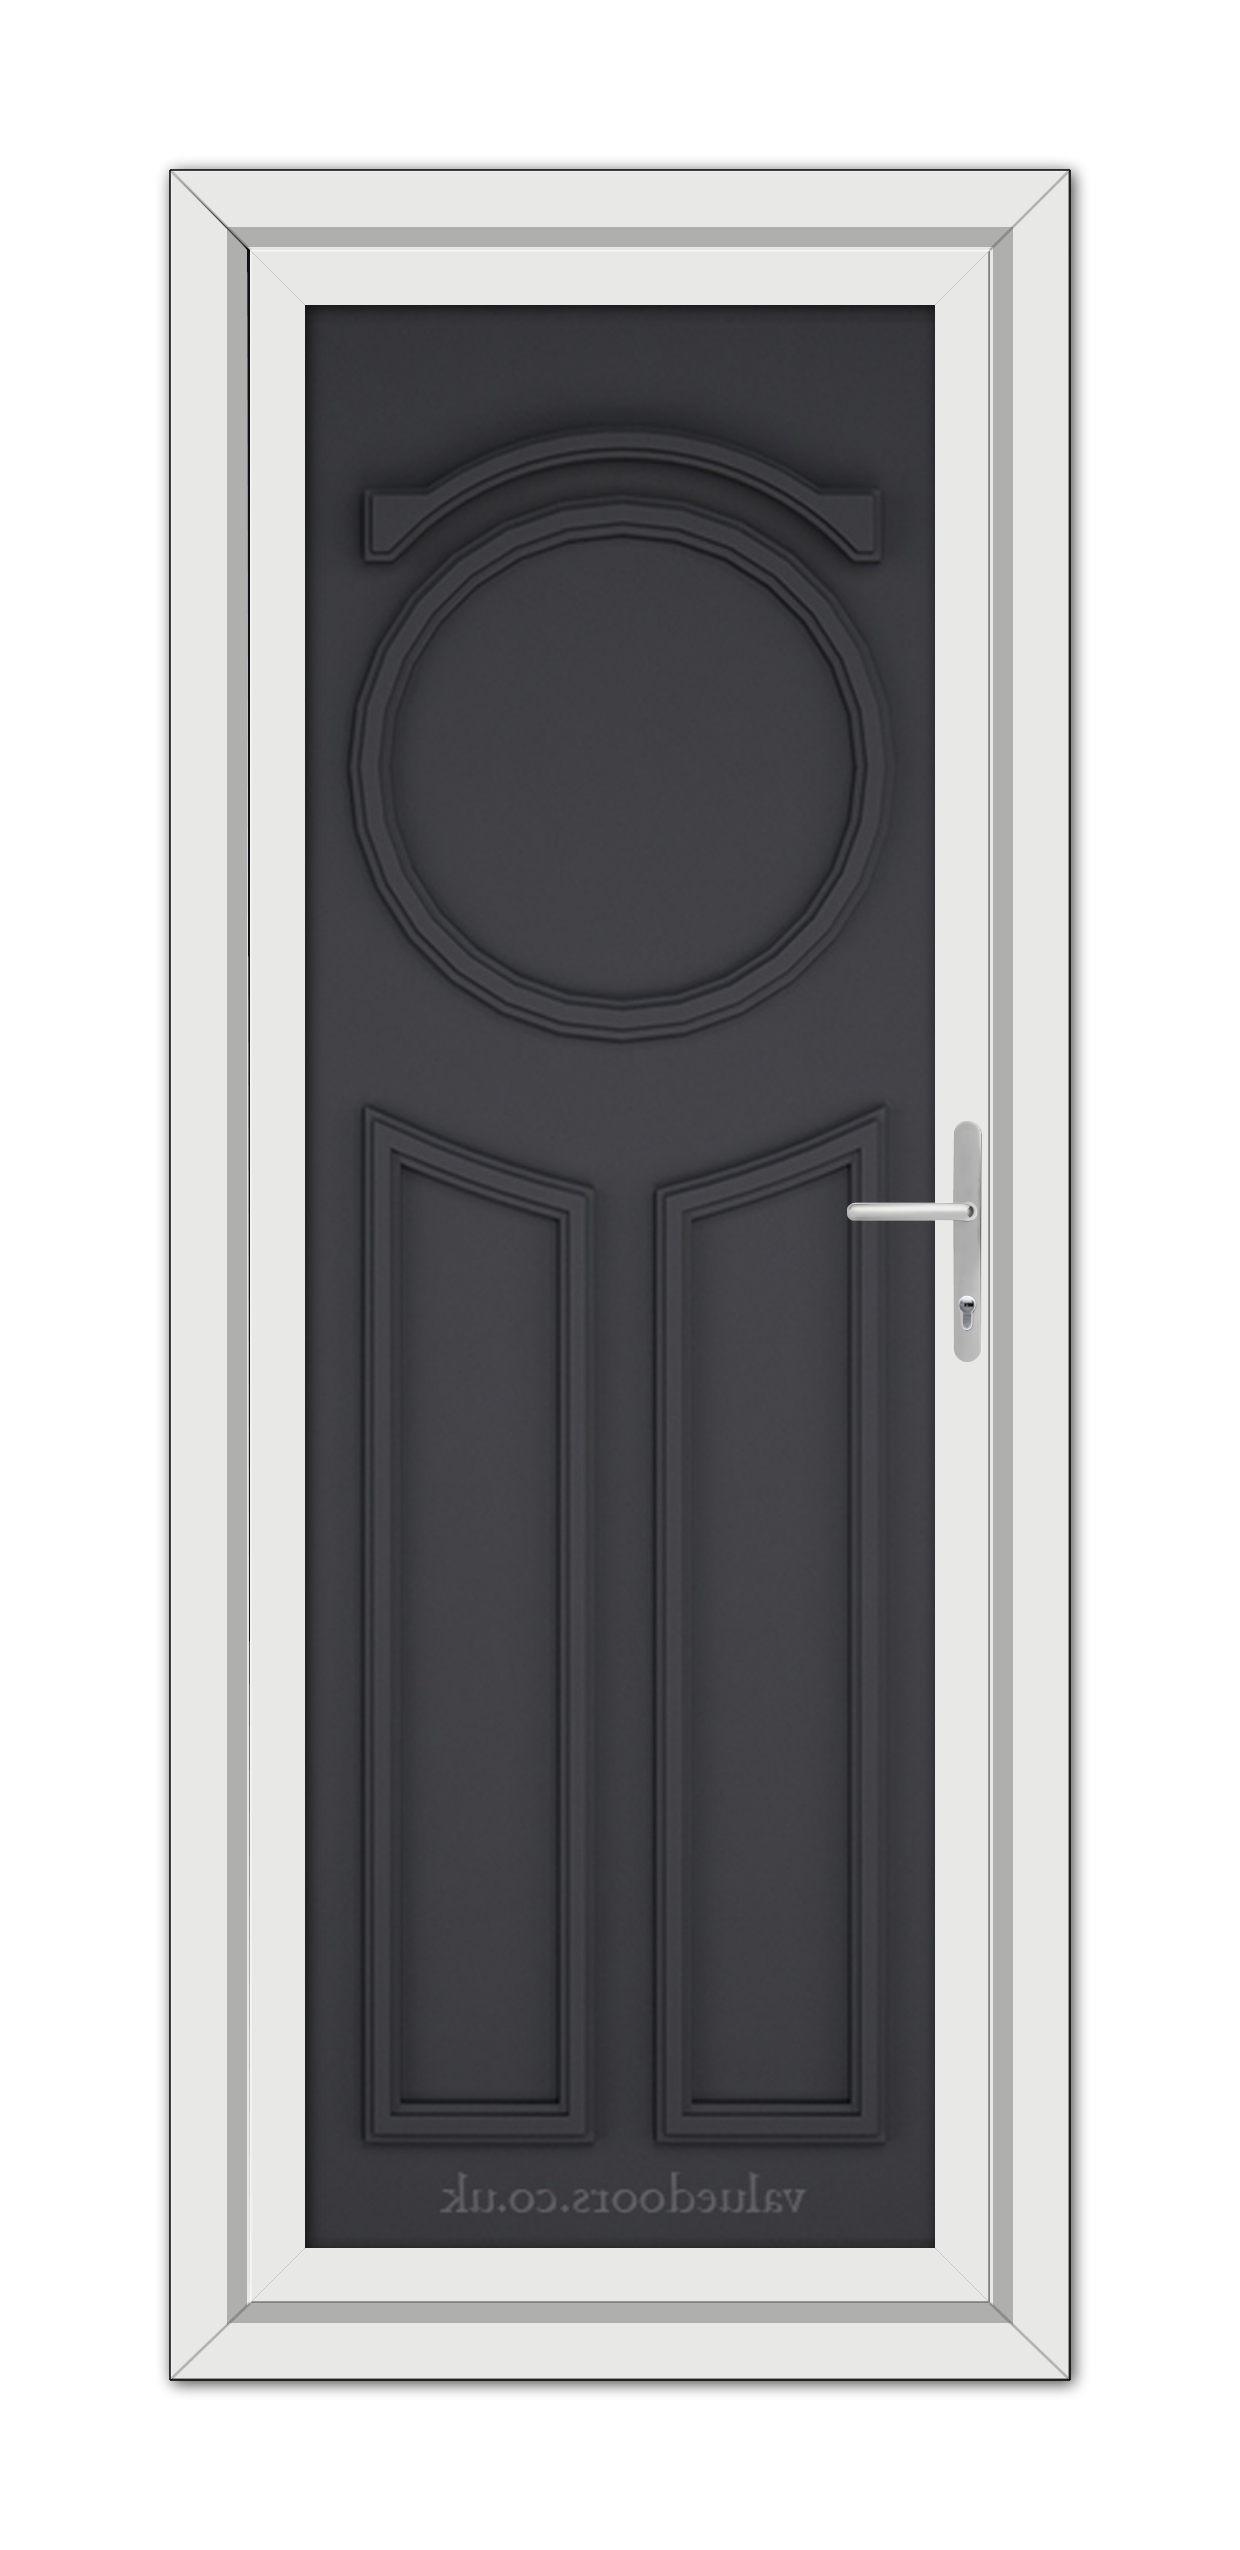 A vertical image of a Grey Blenheim Solid uPVC Door with a circular window at the top, framed in white, featuring a metallic handle on the right side.